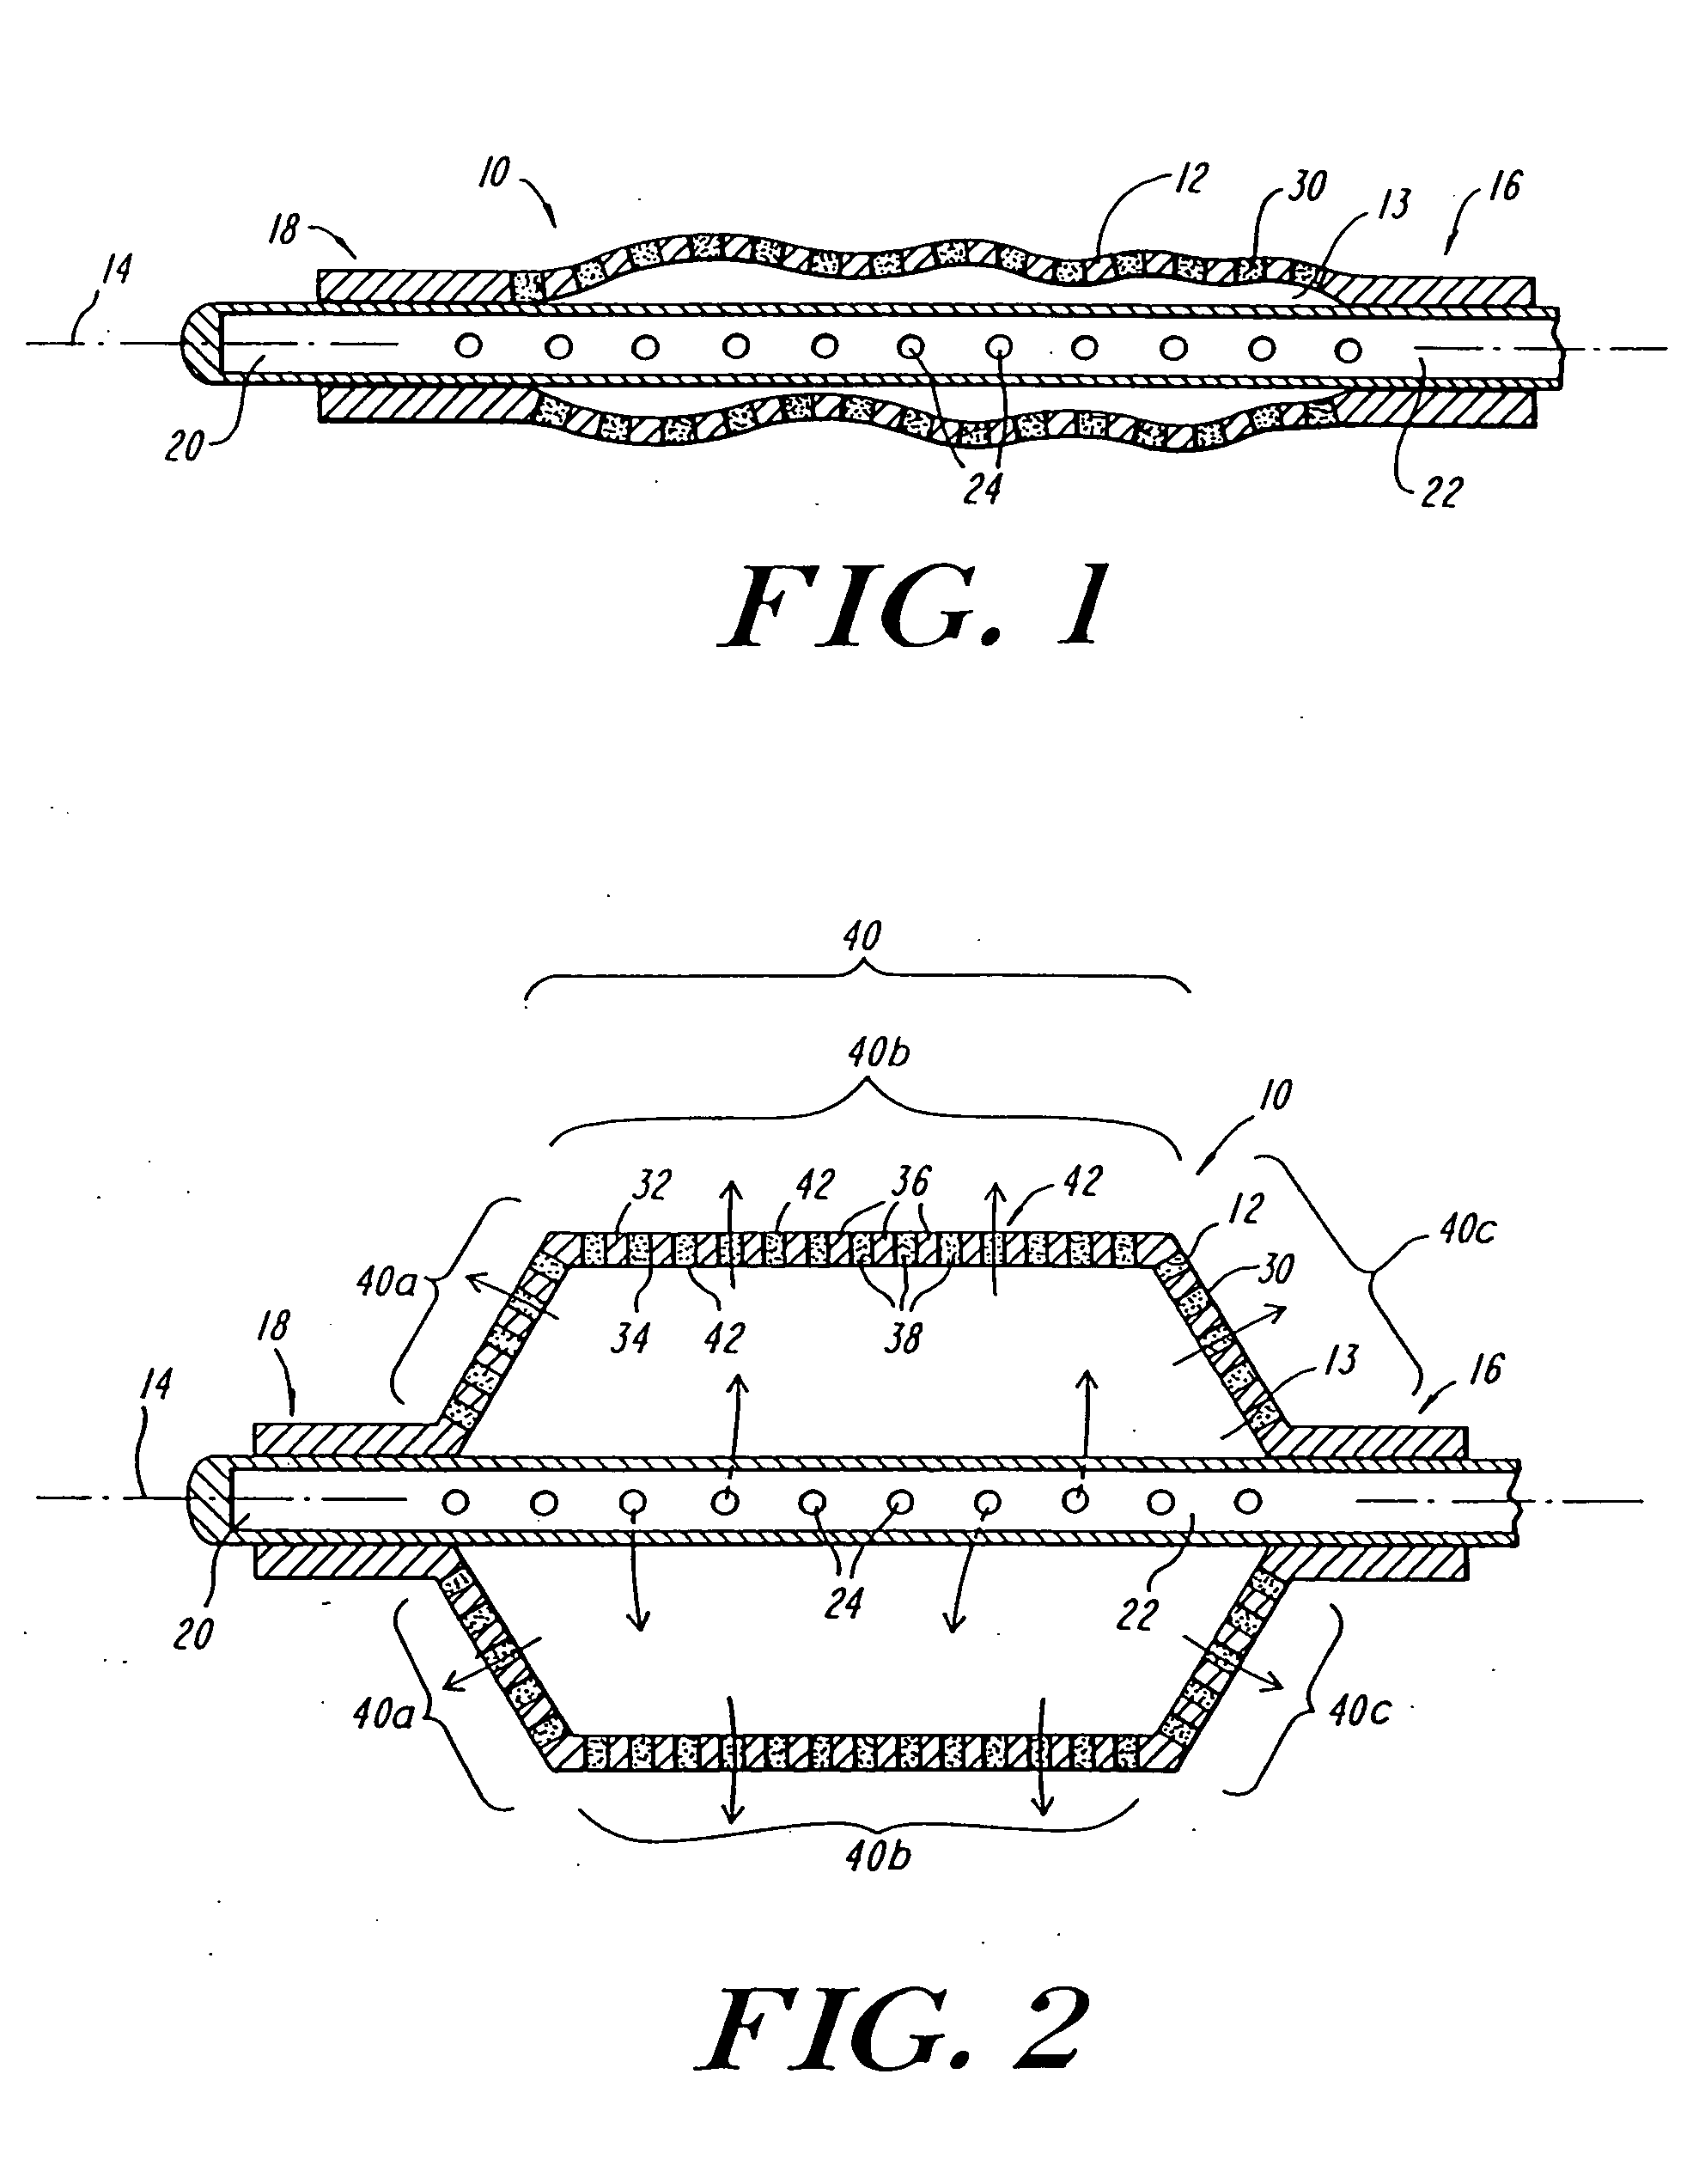 Expandable fluoropolymer device for delivery of therapeutic agents and method of making